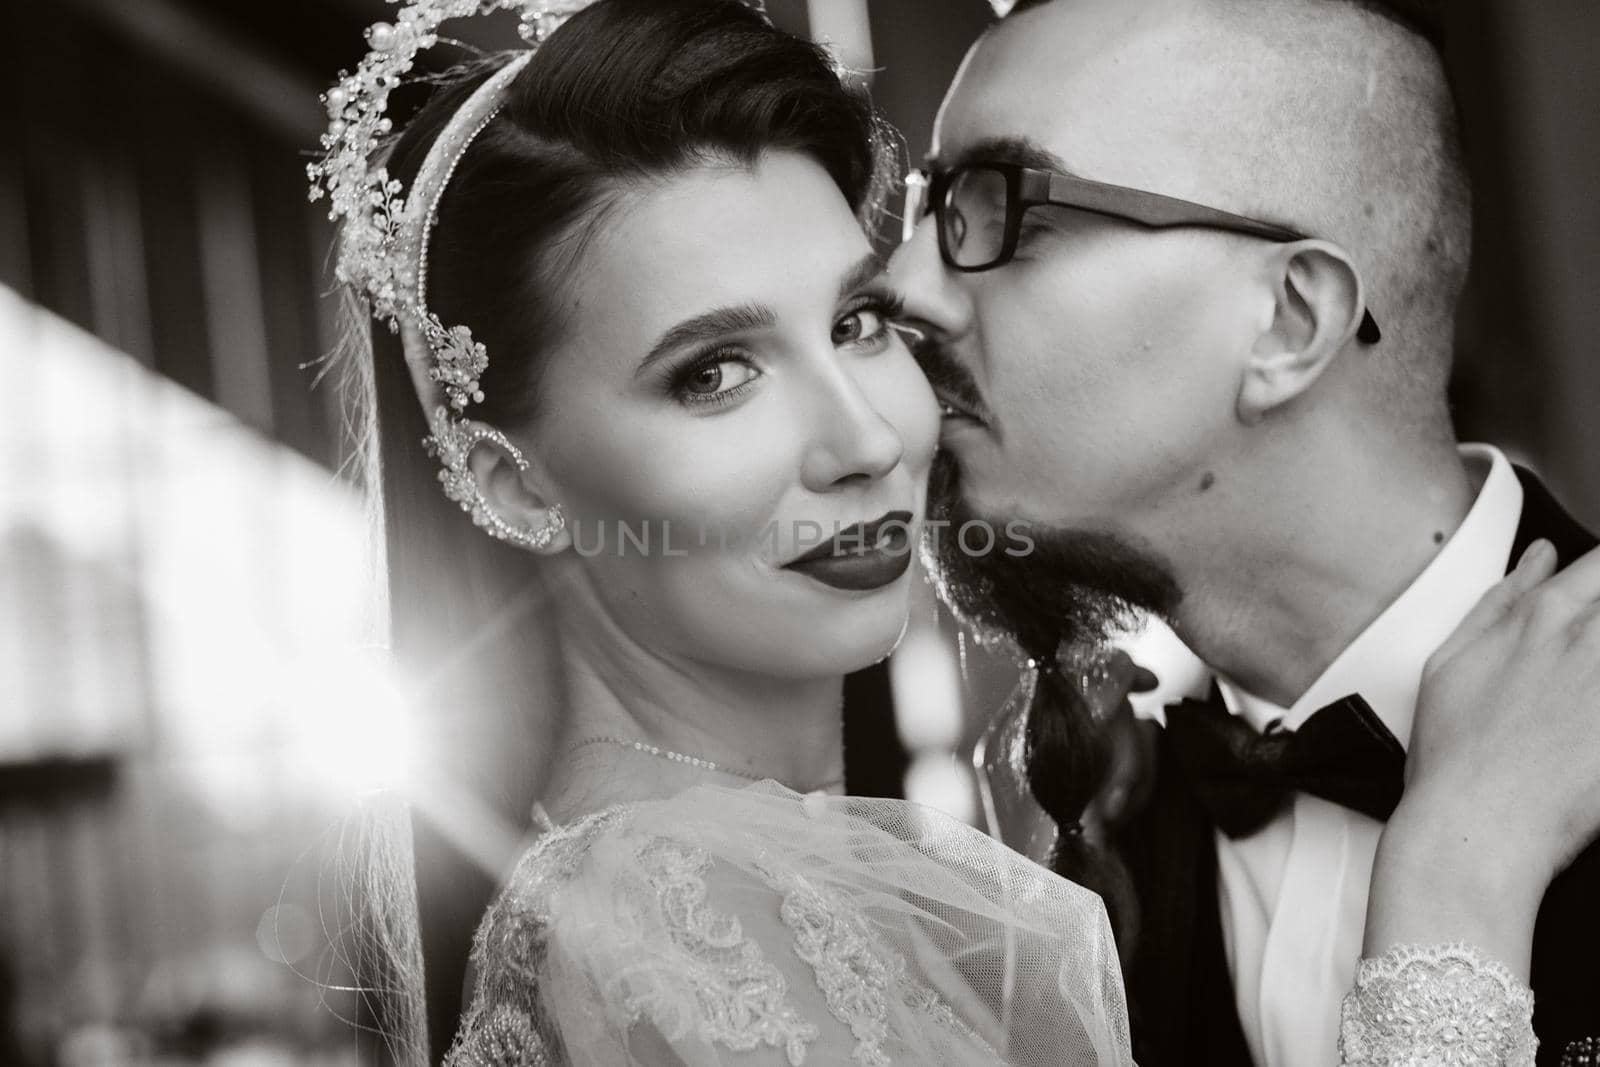 Stylish wedding couple in the interior. Glamorous bride and groom.black and white photo.